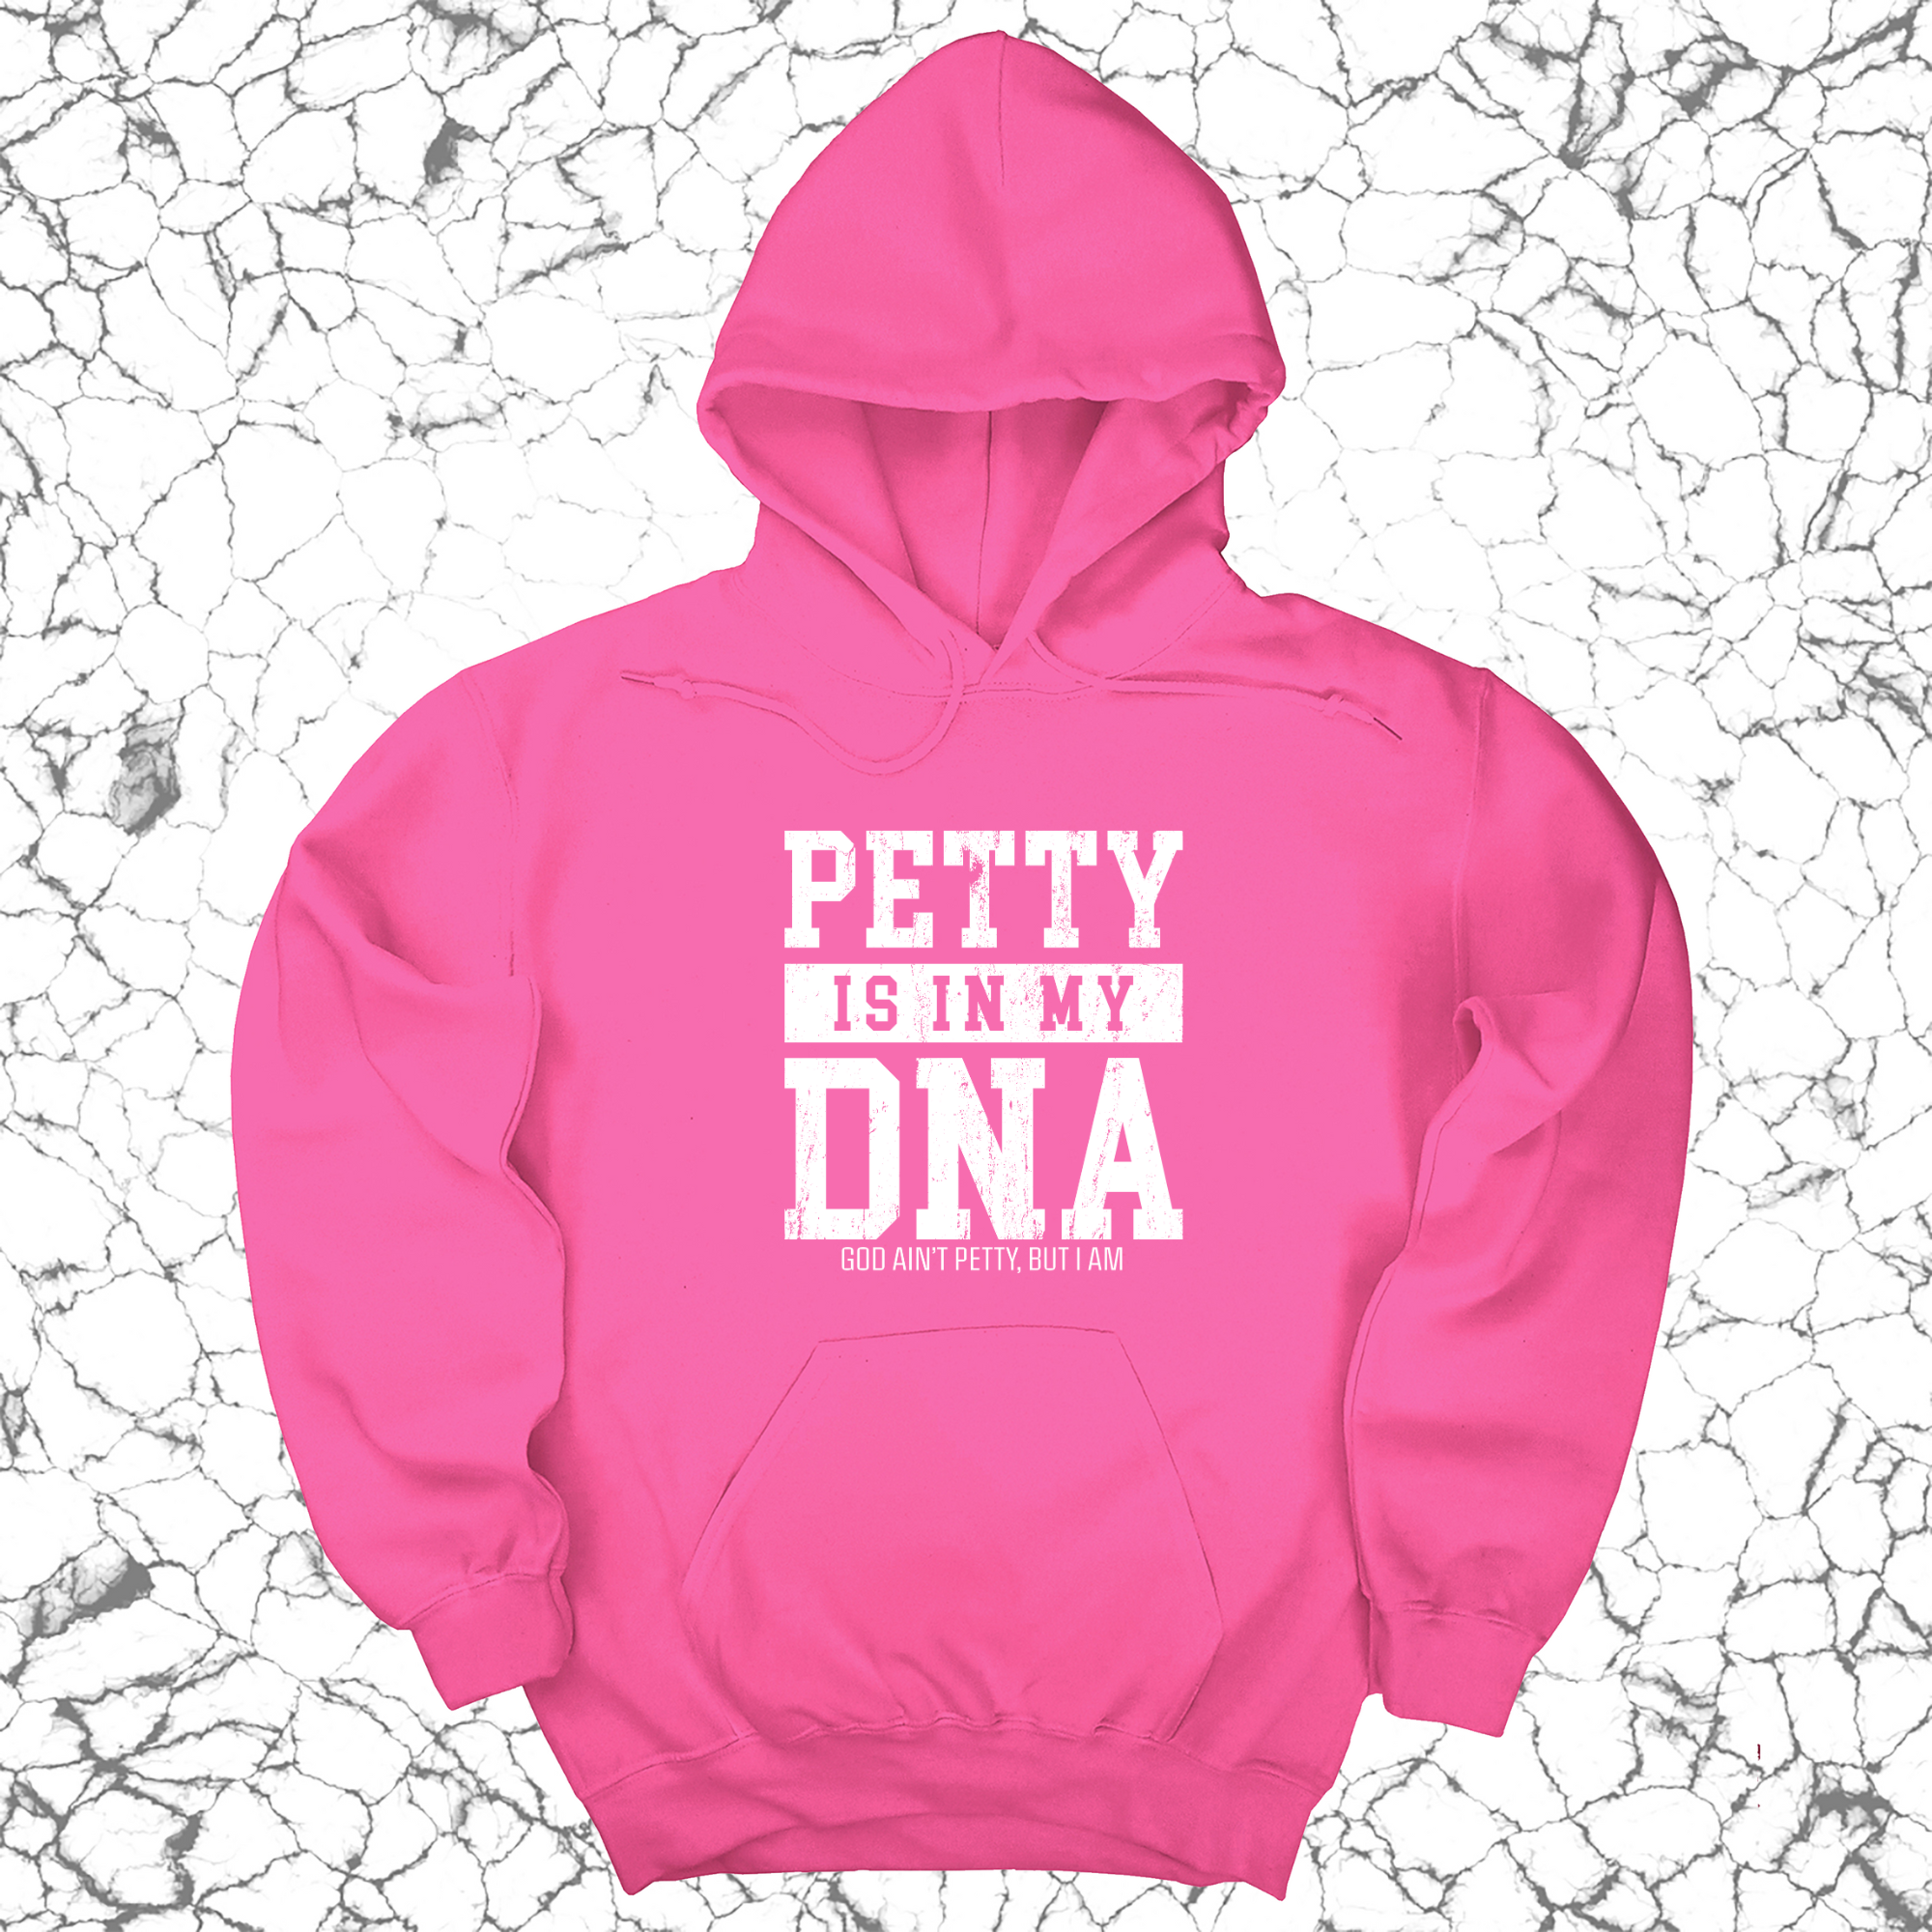 Petty is in my DNA Unisex Hoodie-Hoodie-The Original God Ain't Petty But I Am